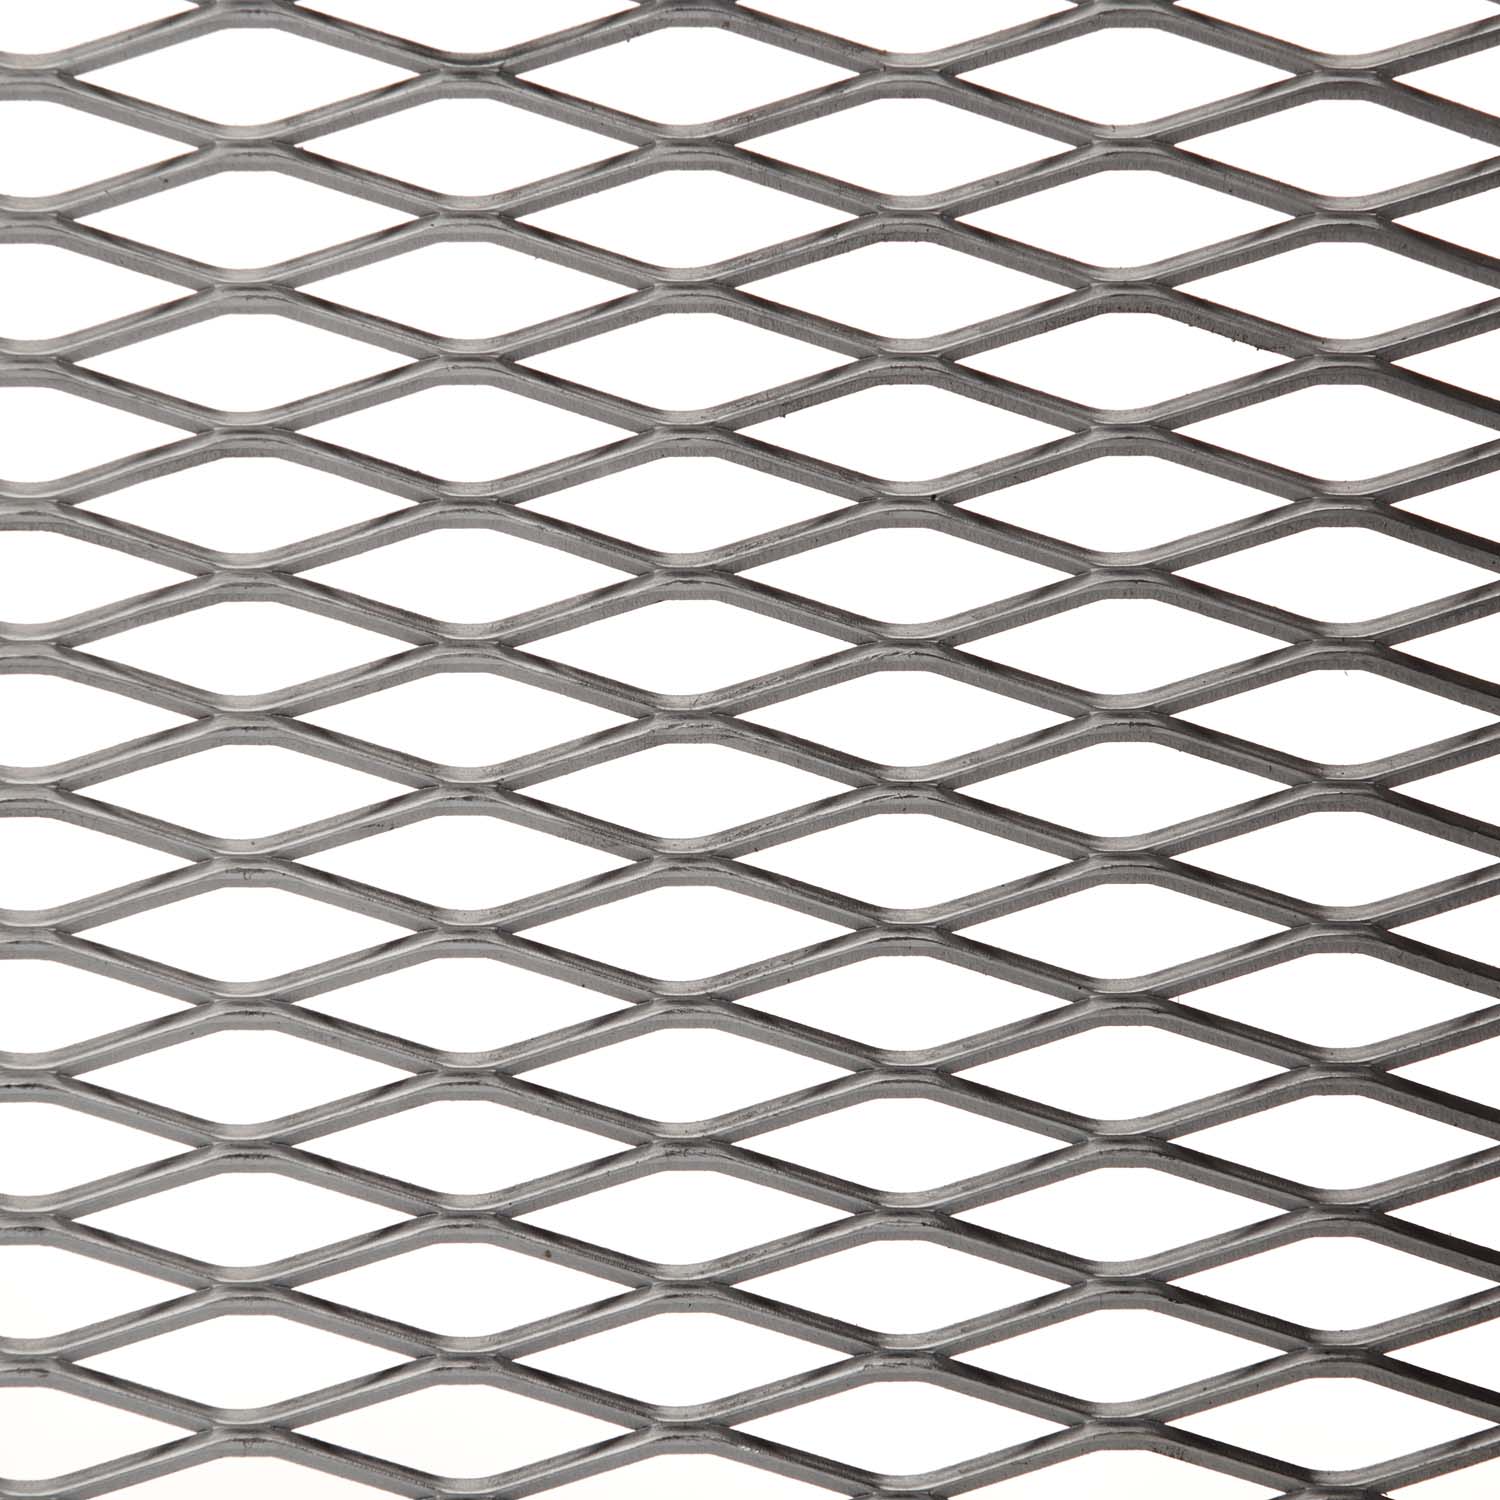 What is diamond expanded metal mesh used for